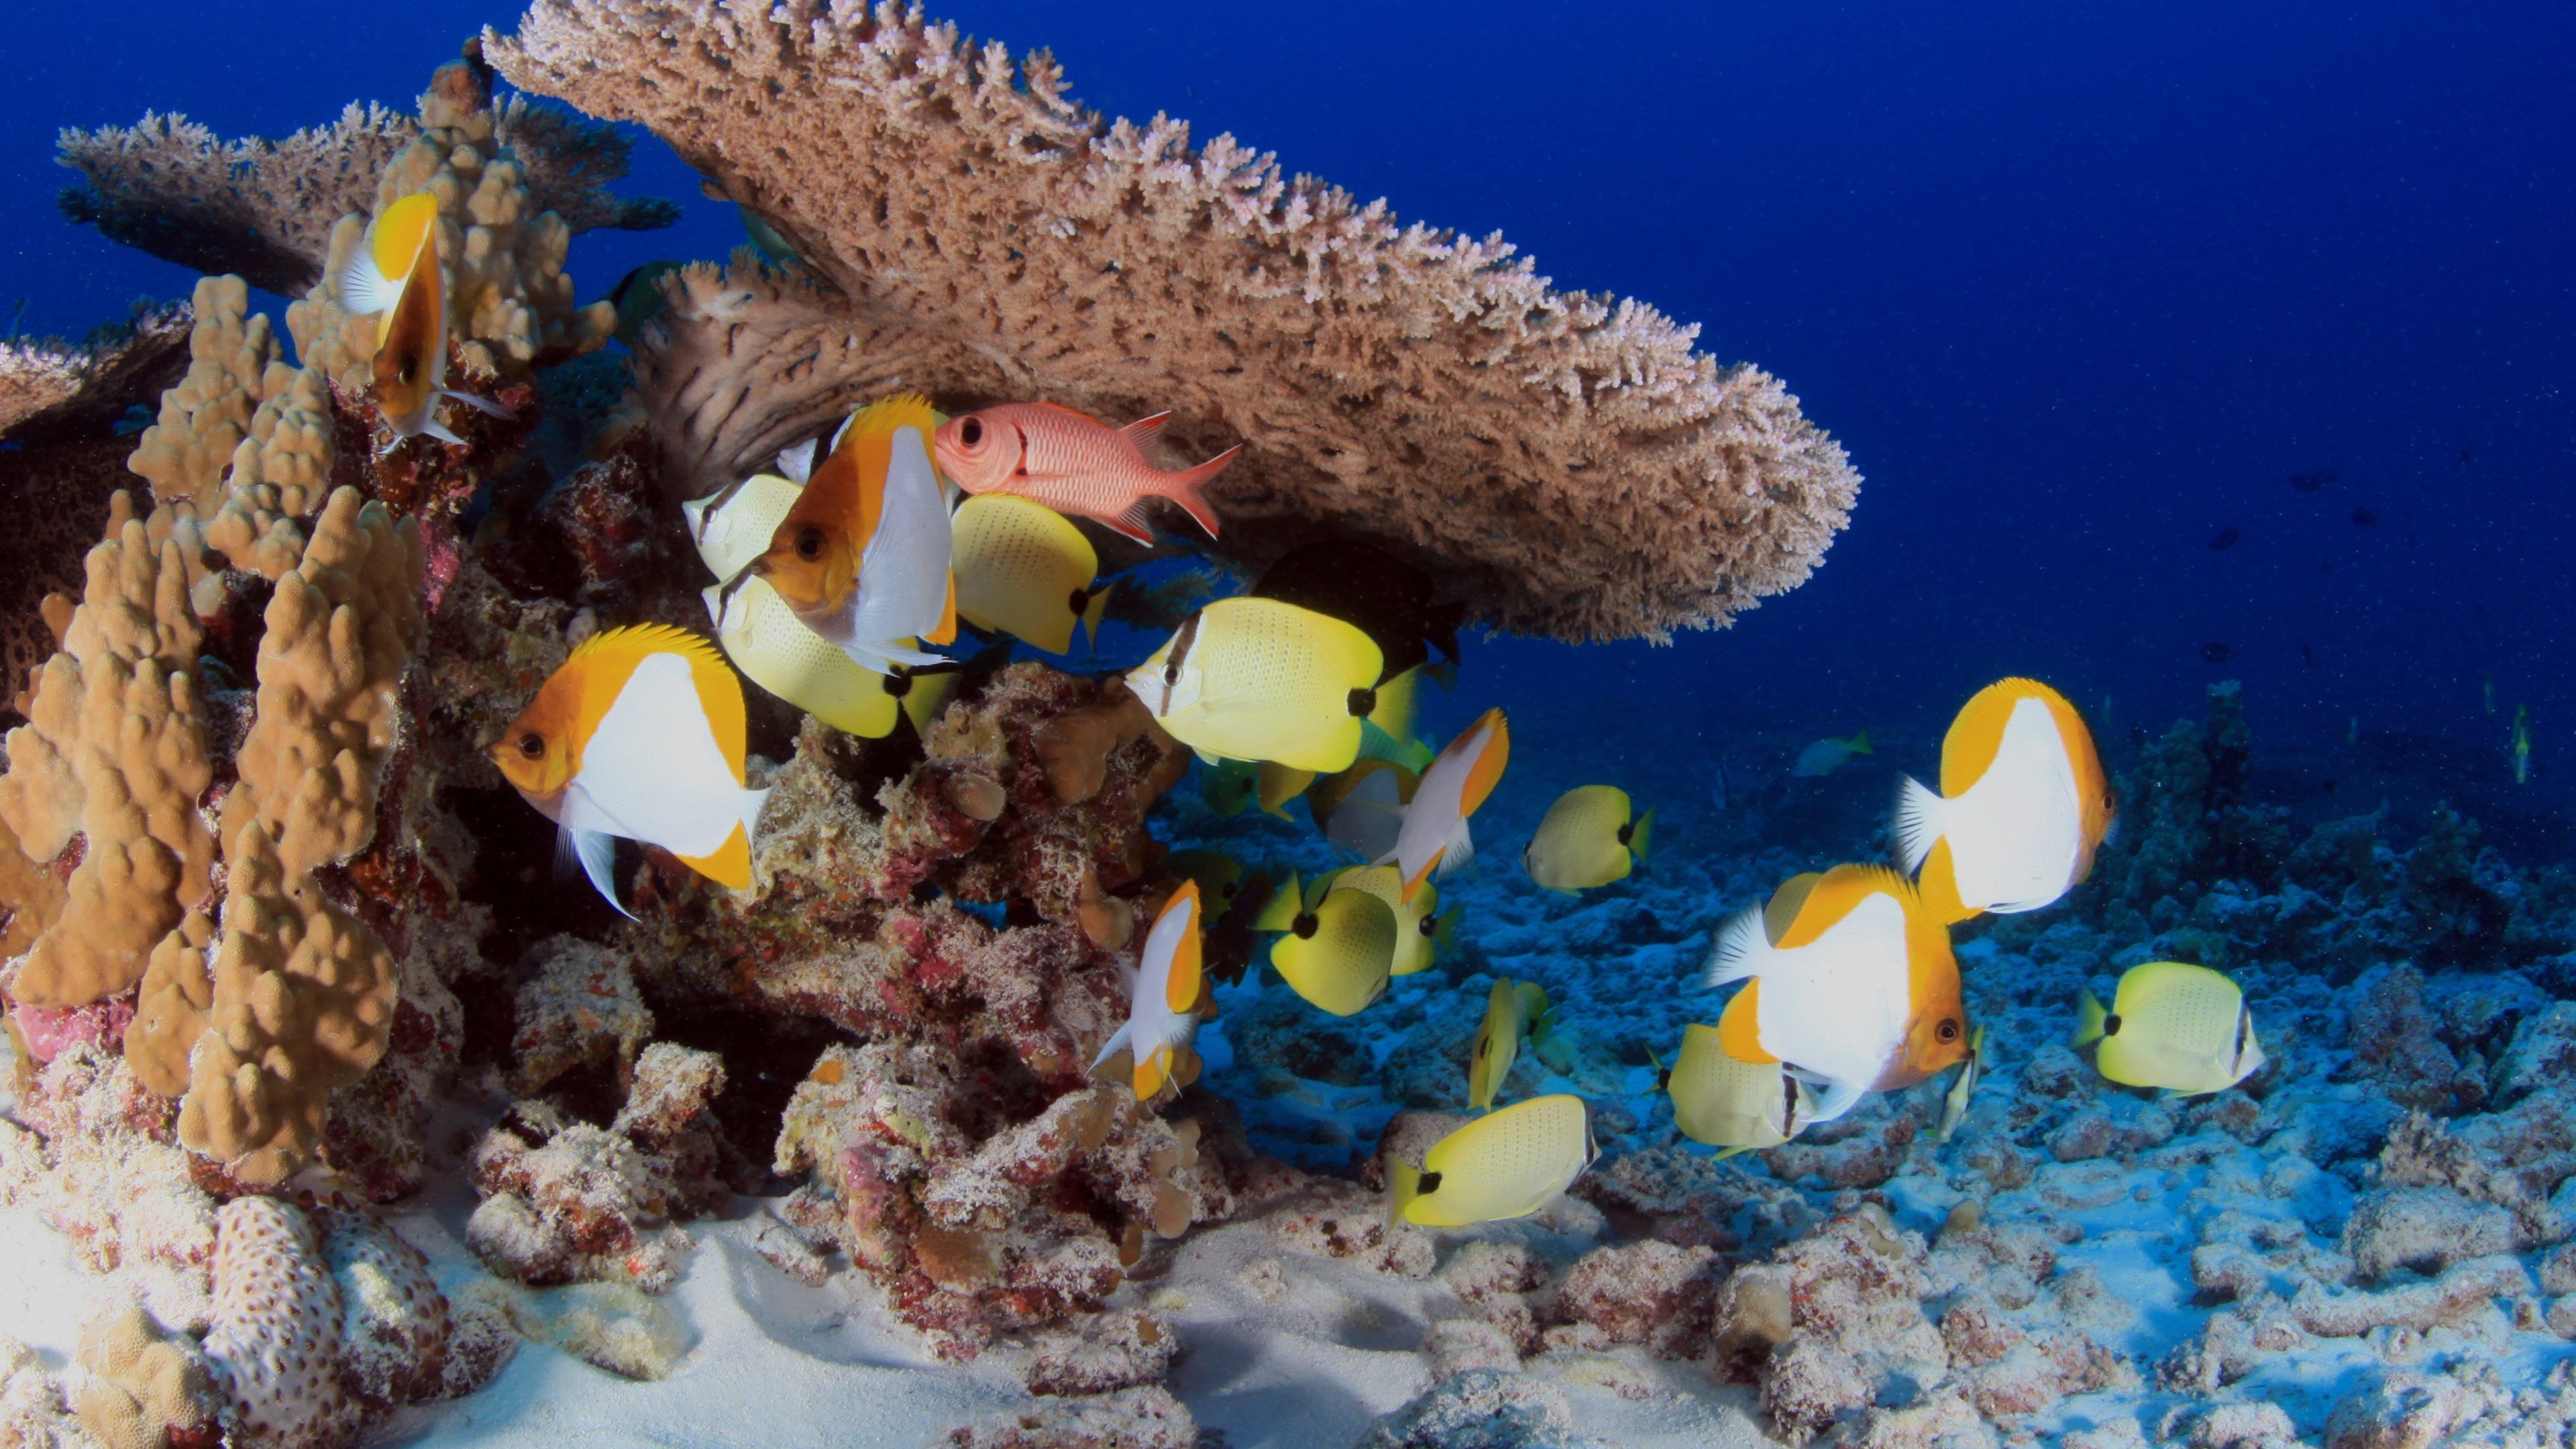 3840x2160 Coral Reefs Underwater School Fishes Blue Ocean Reef Fish Yellow Wallpaper  Pictures Hd Elegant Awesome French